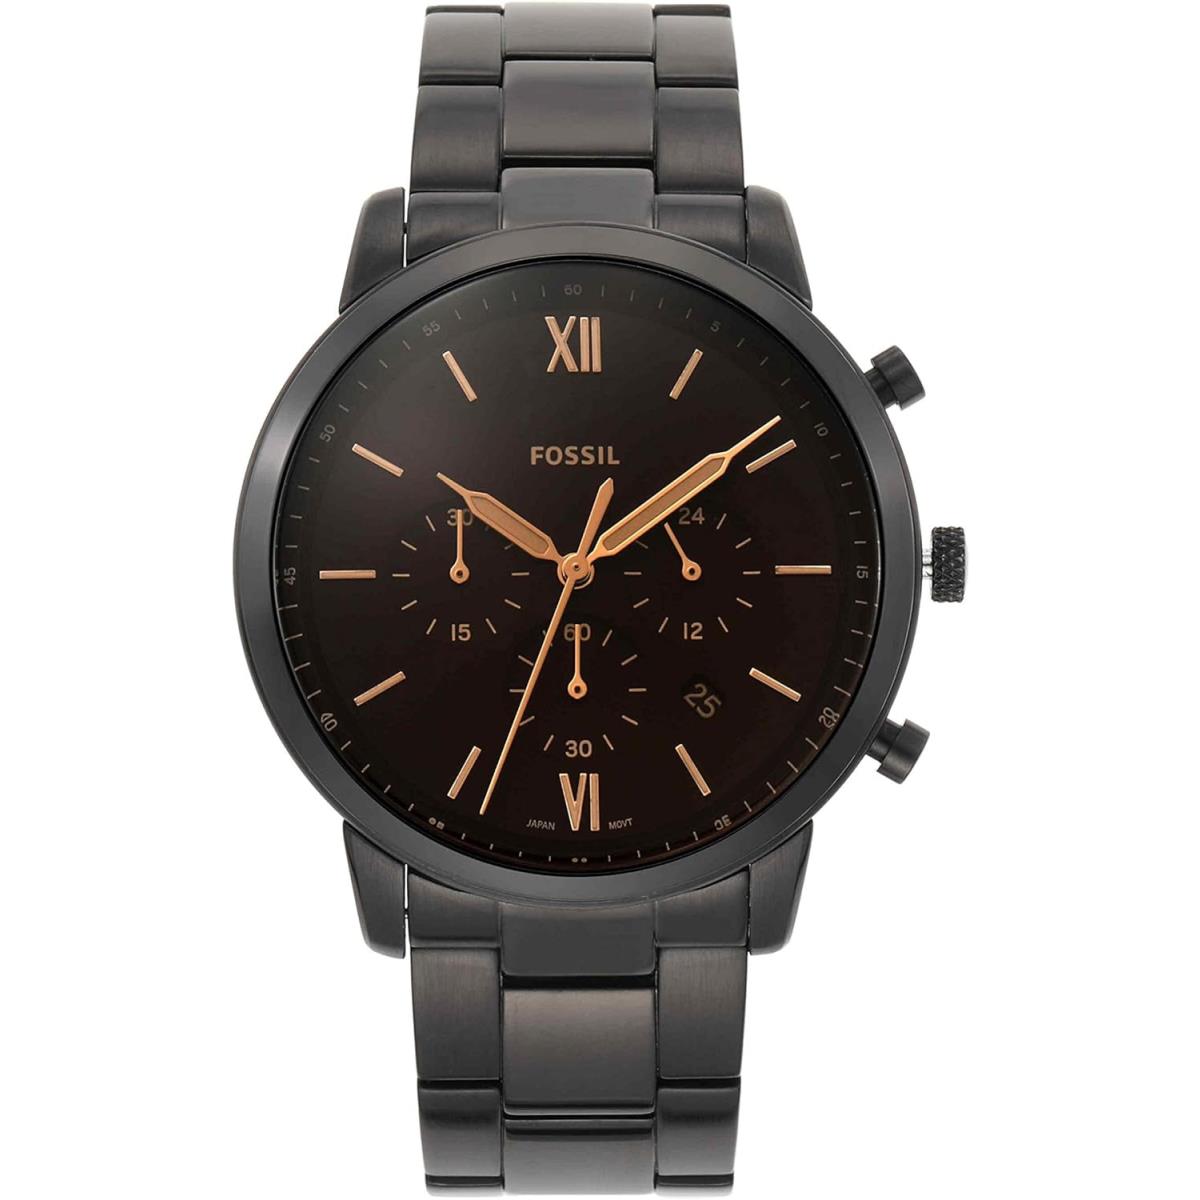 Fossil Neutra Men`s Chrono Watch with Stainless Steel Bracelet Black, Brown Dial